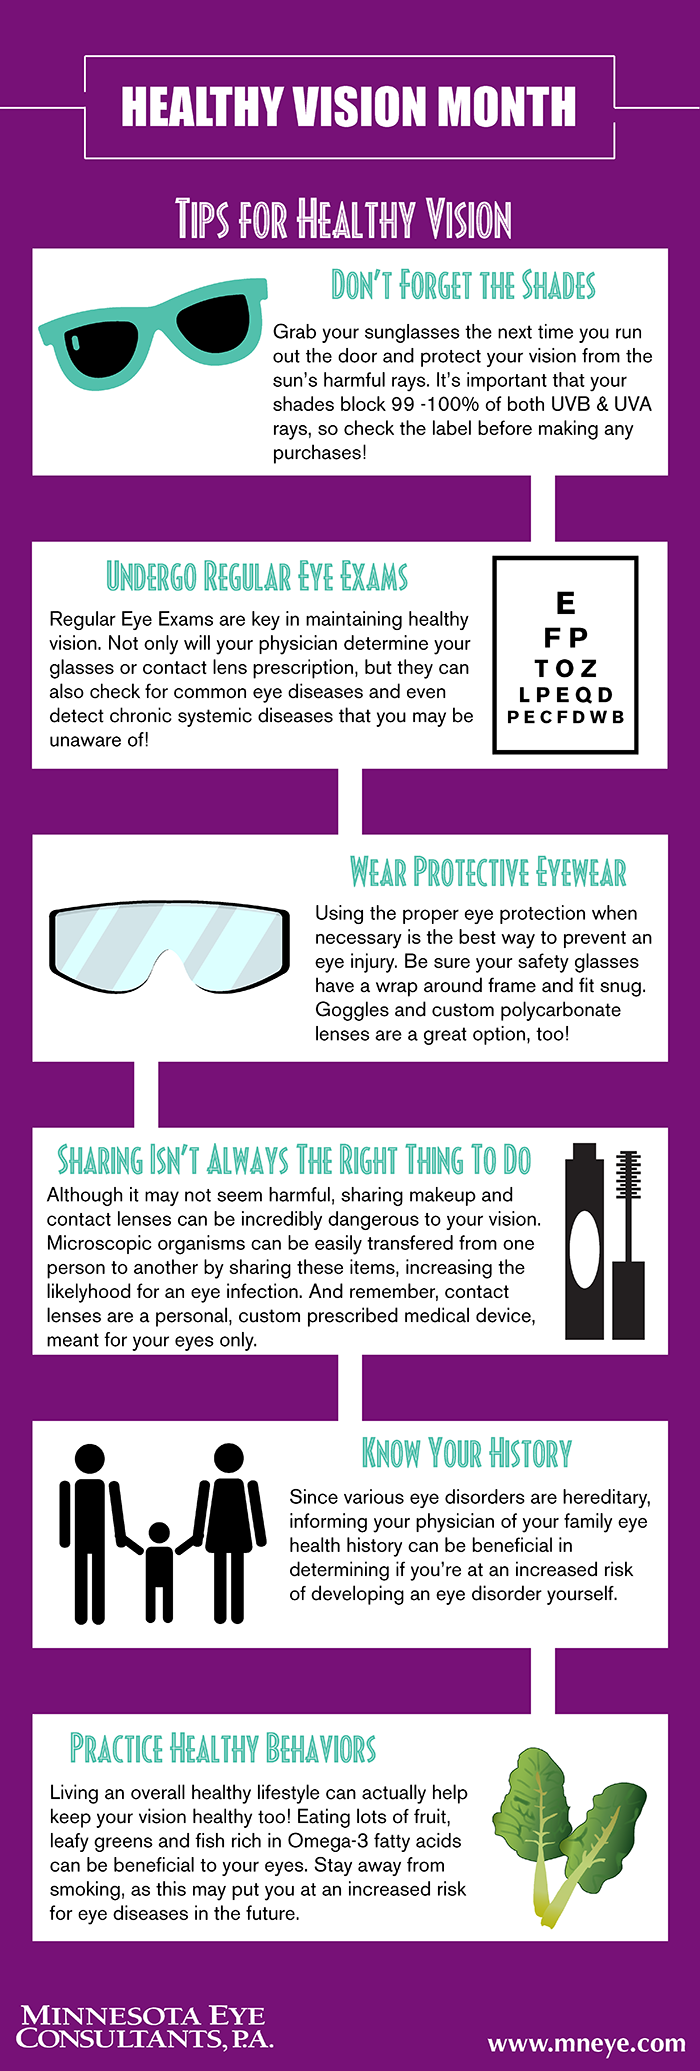 Healthy Vision Month Infographic